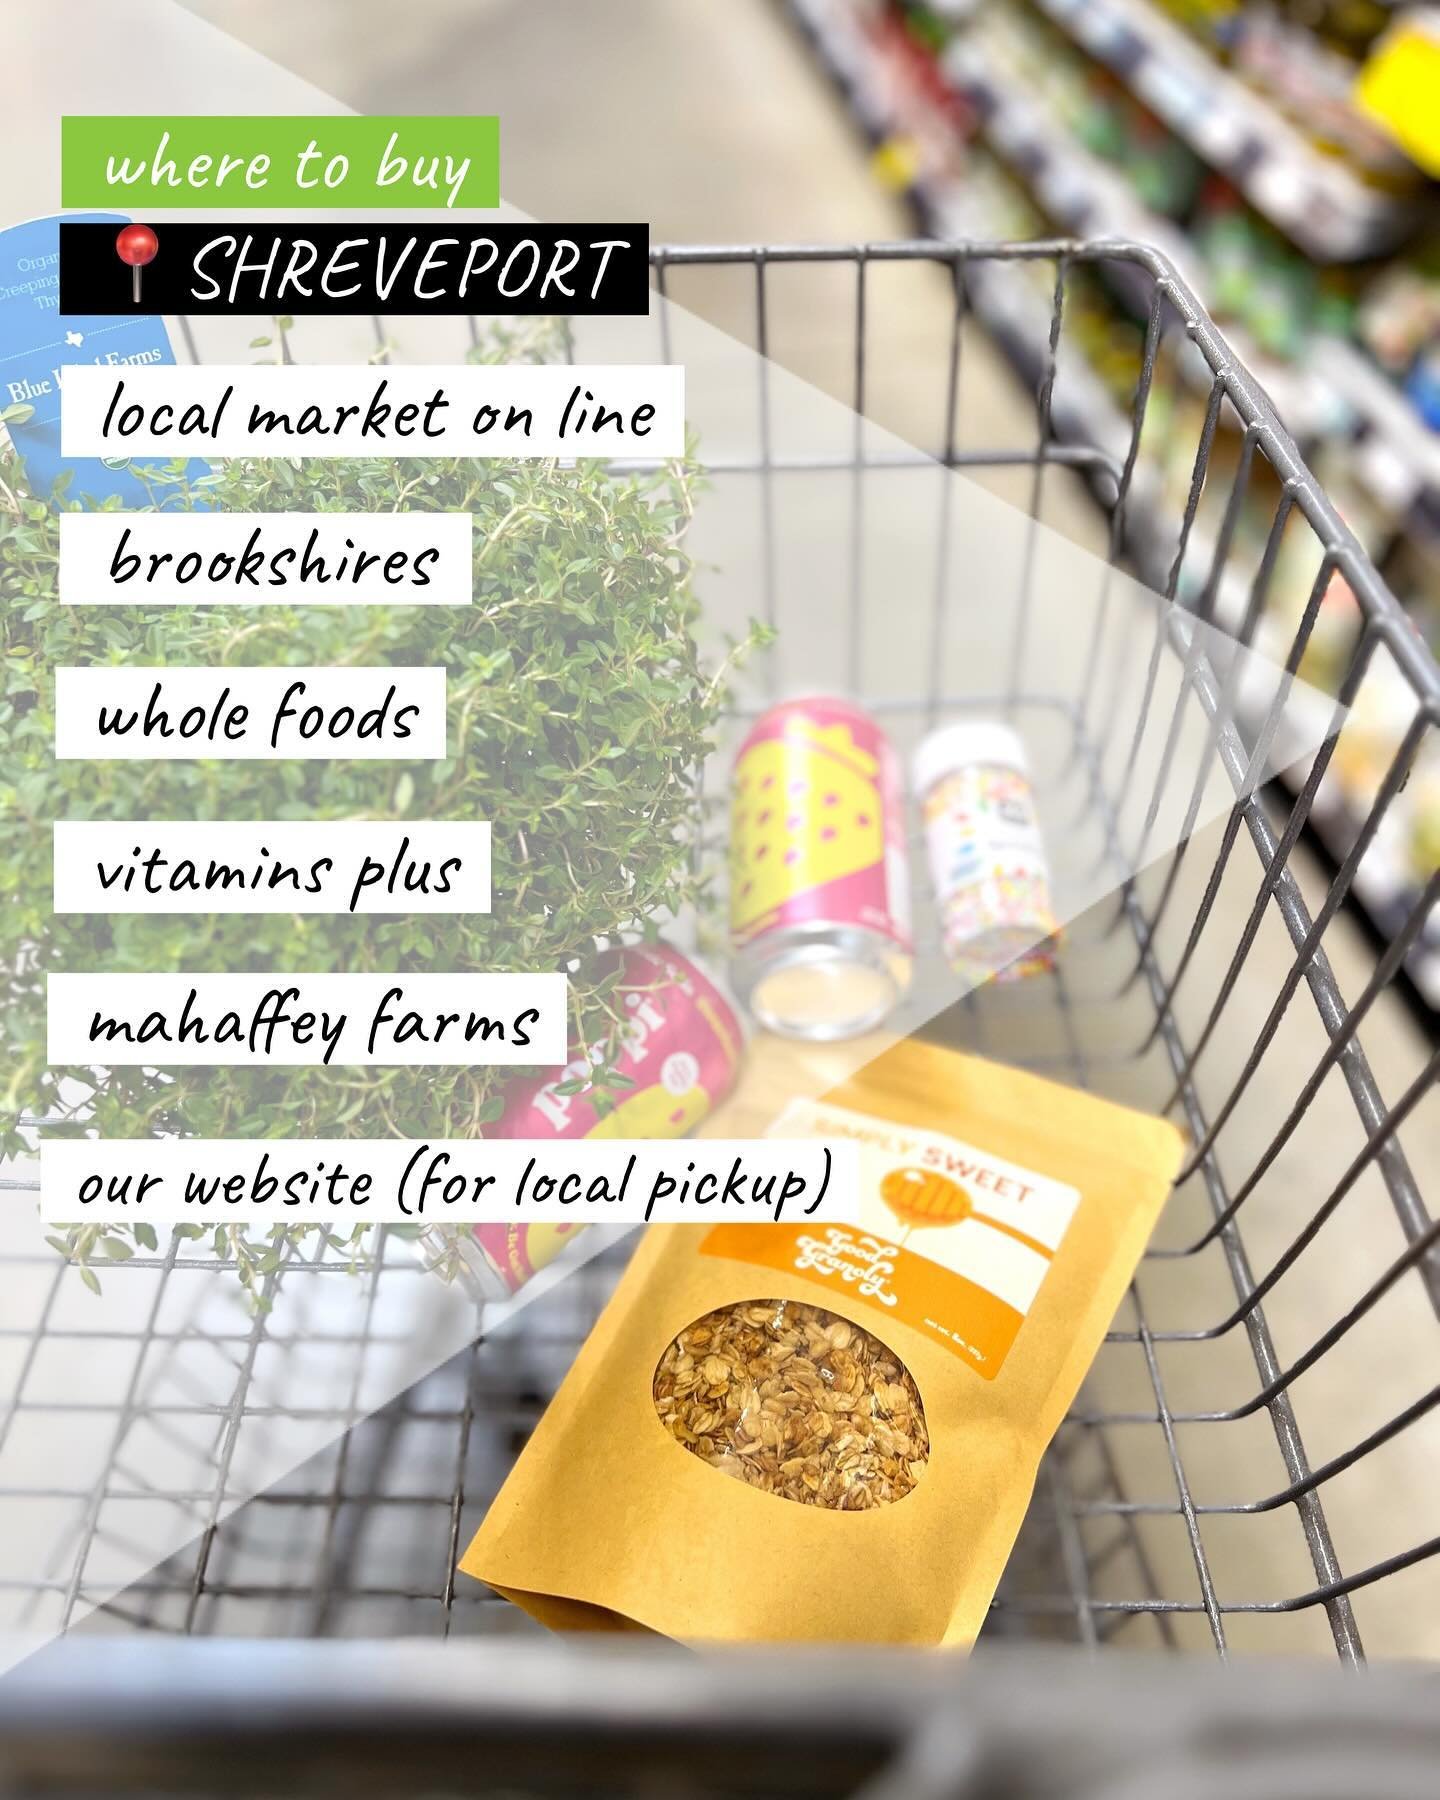 SHREVEPORT / BOSSIER 📣
📍where to buy our granola:

@marketonlineave 
@brookshires_ 
@wholefoods 
@vitaminsplus_shreveport 
@mahaffeyfarms 

And you can always shop online and pick up at our production facility downtown 🏭
#eat318 #shreveport #bossi